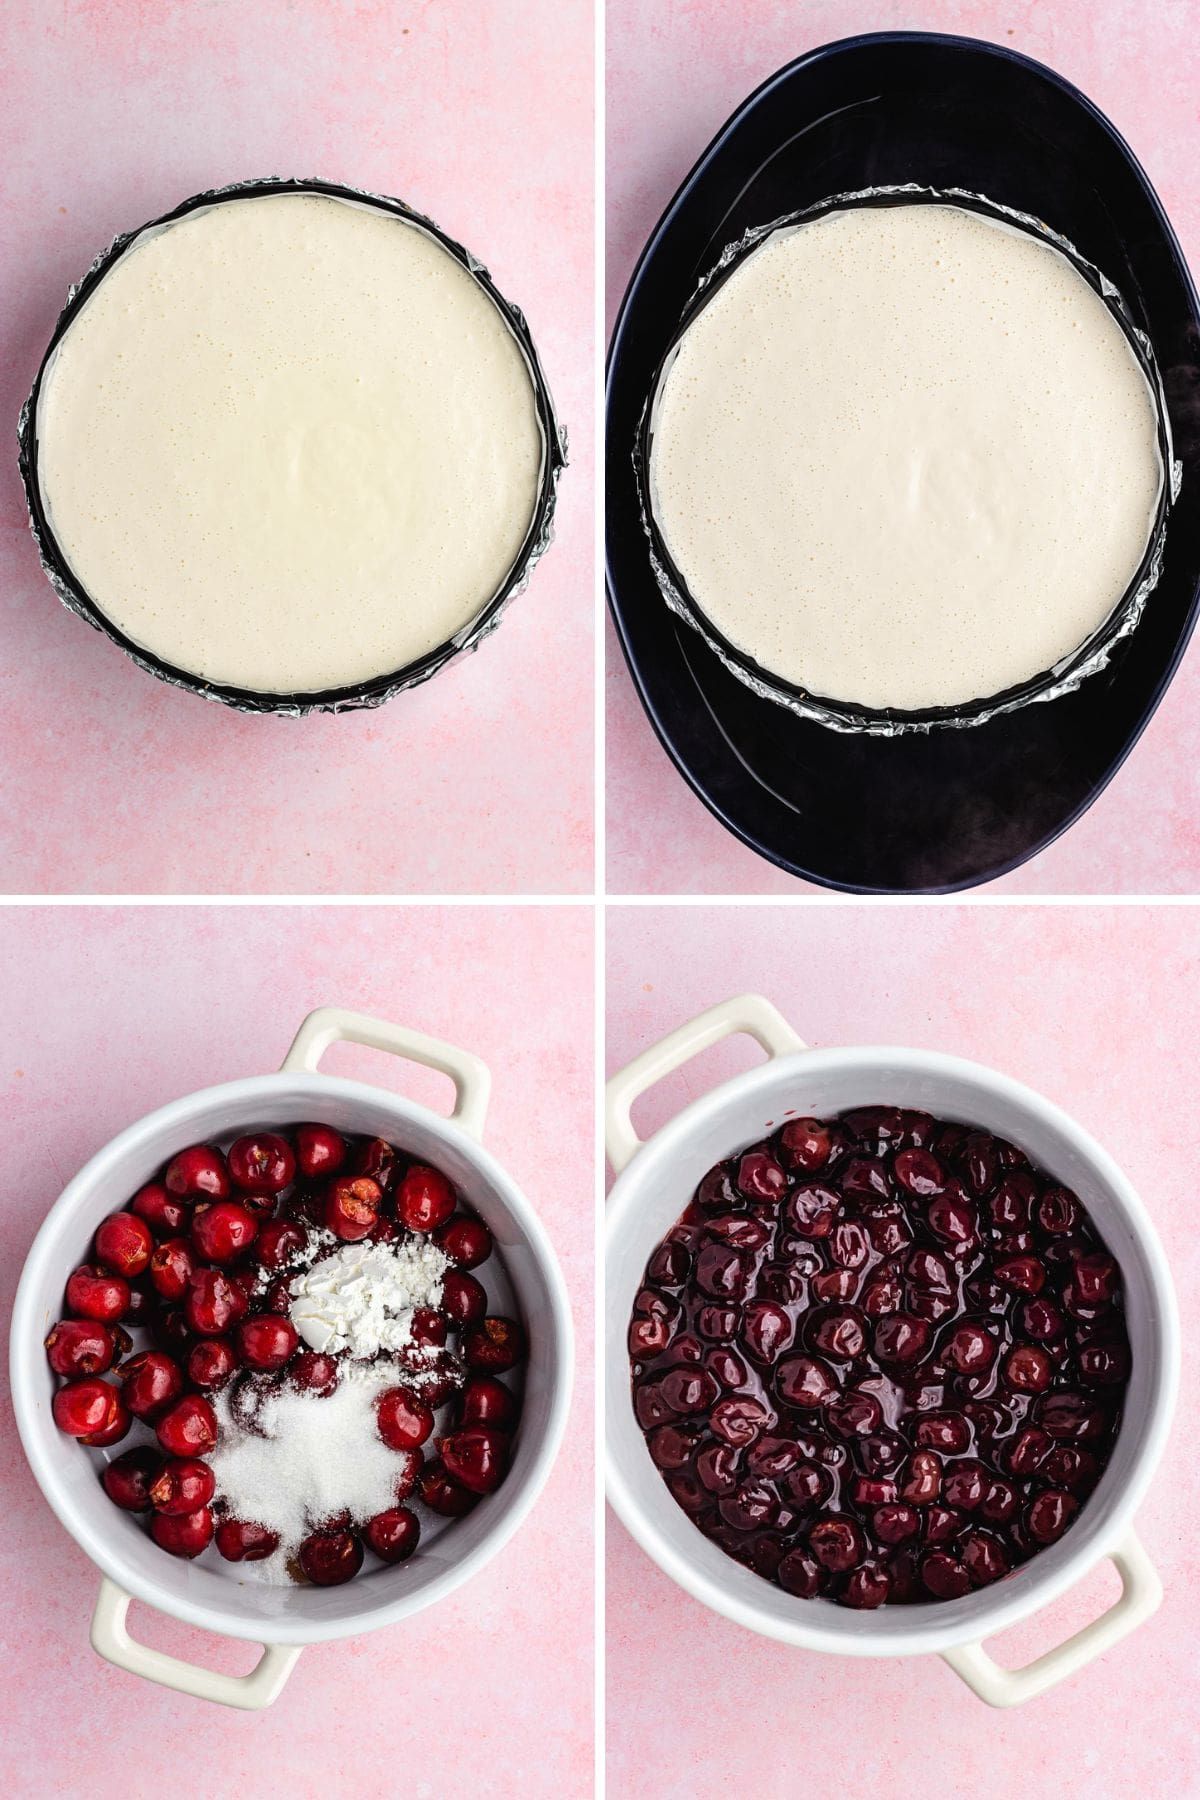 Cherry Cheesecake collage of baking cake and preparing topping